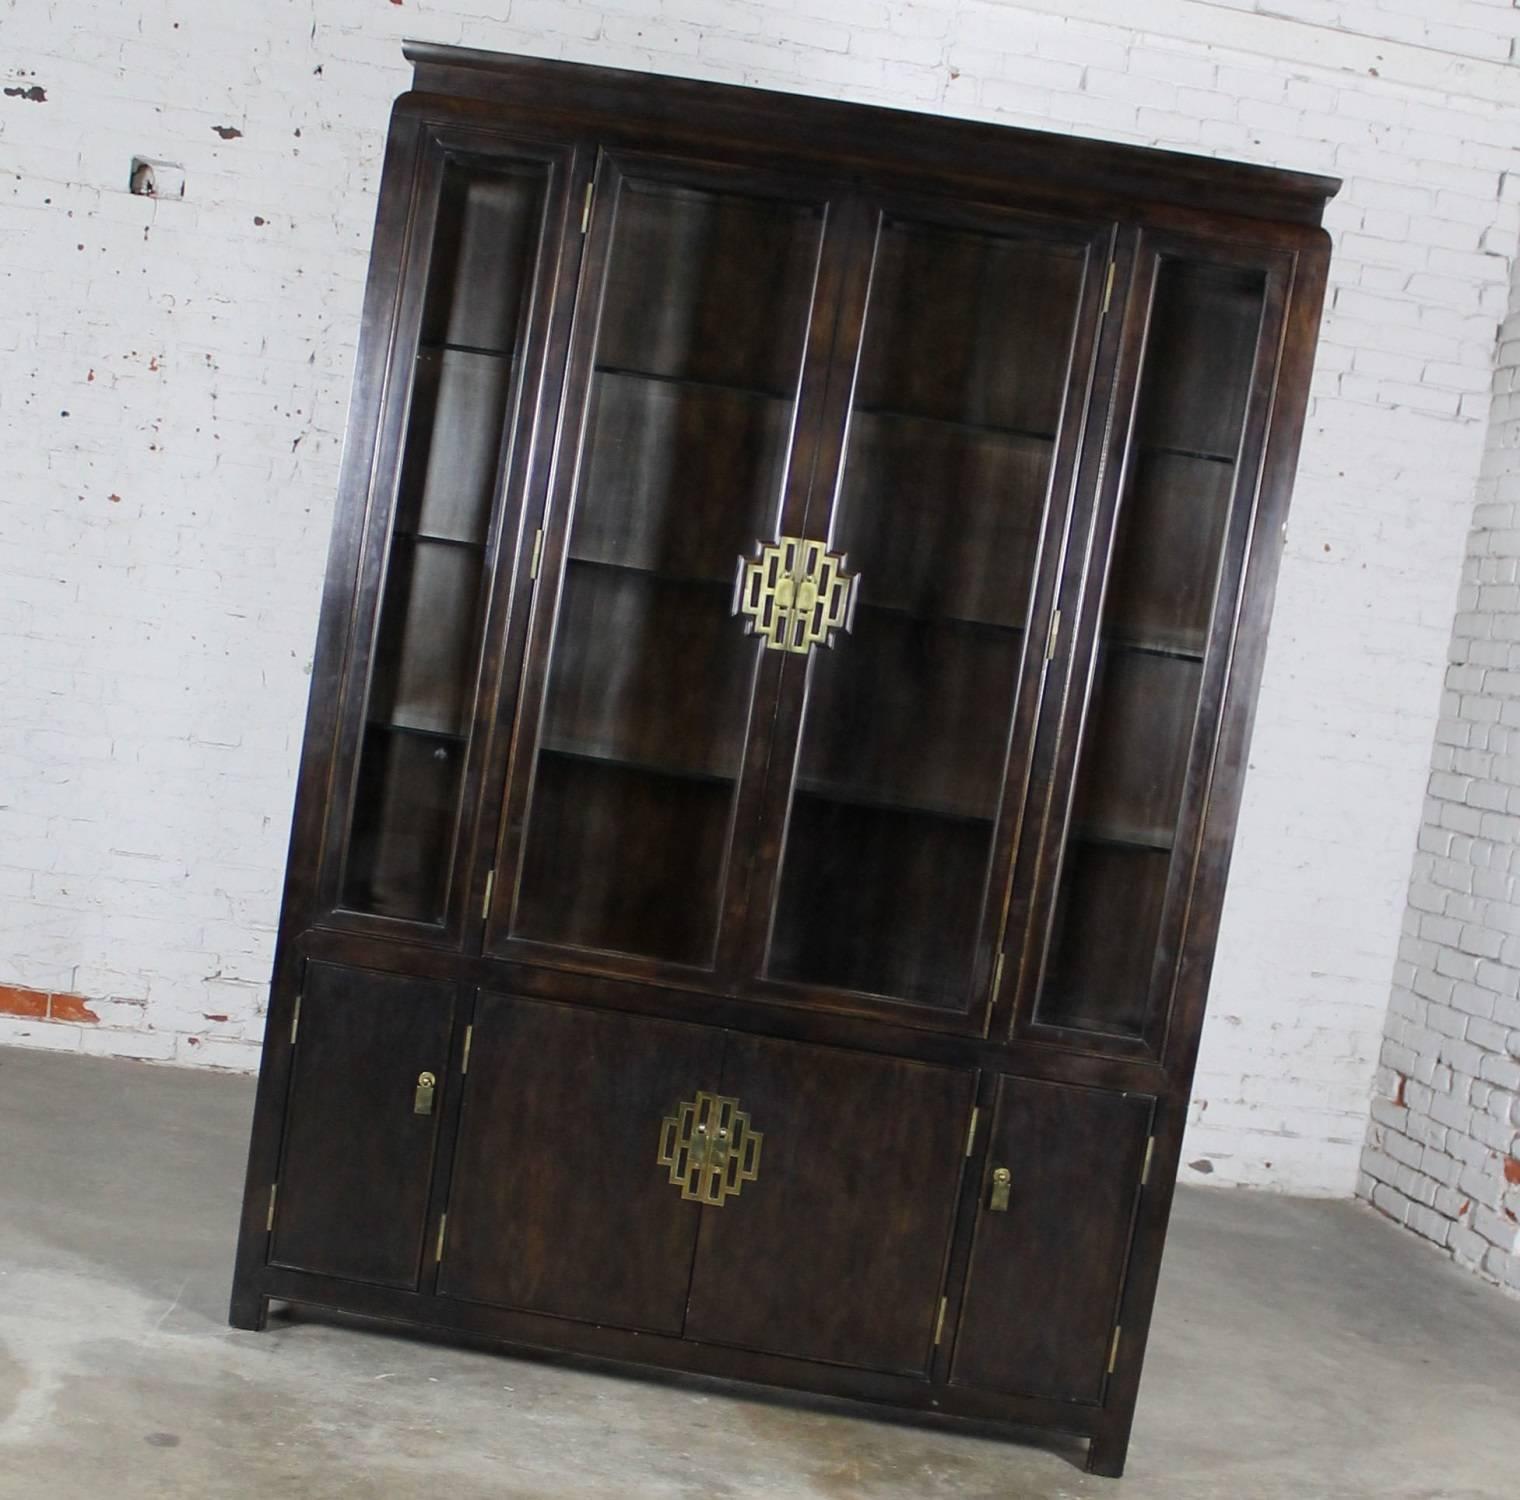 Gorgeous china cabinet, display cabinet or bookcase from the Chin Hua collection by Century Furniture, circa 1970. This great cabinet is lighted and in wonderful vintage condition. See long description and photos for details.

I can just imagine